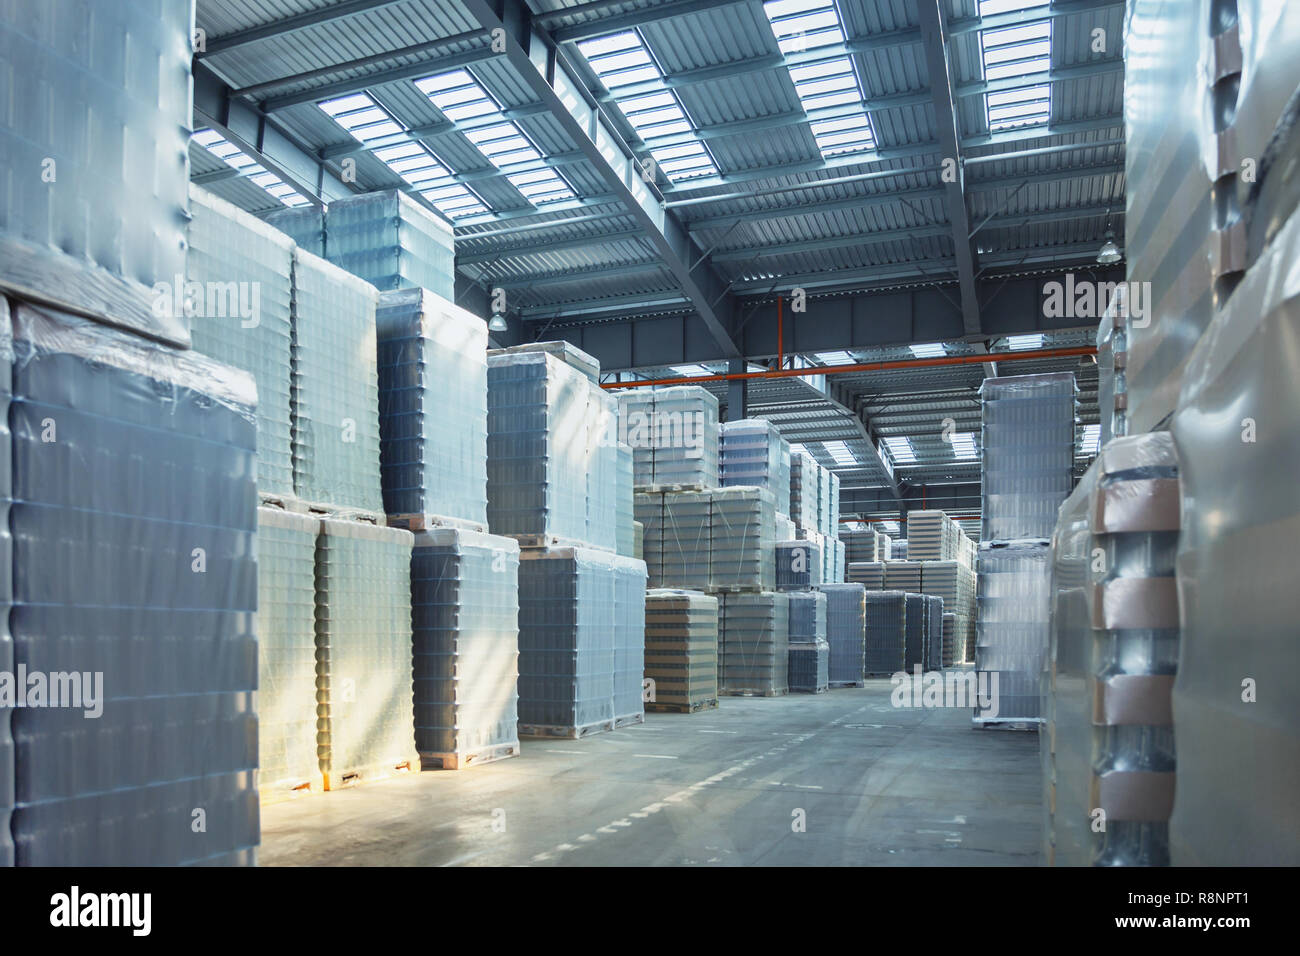 Warehouse with glass bottles Stock Photo